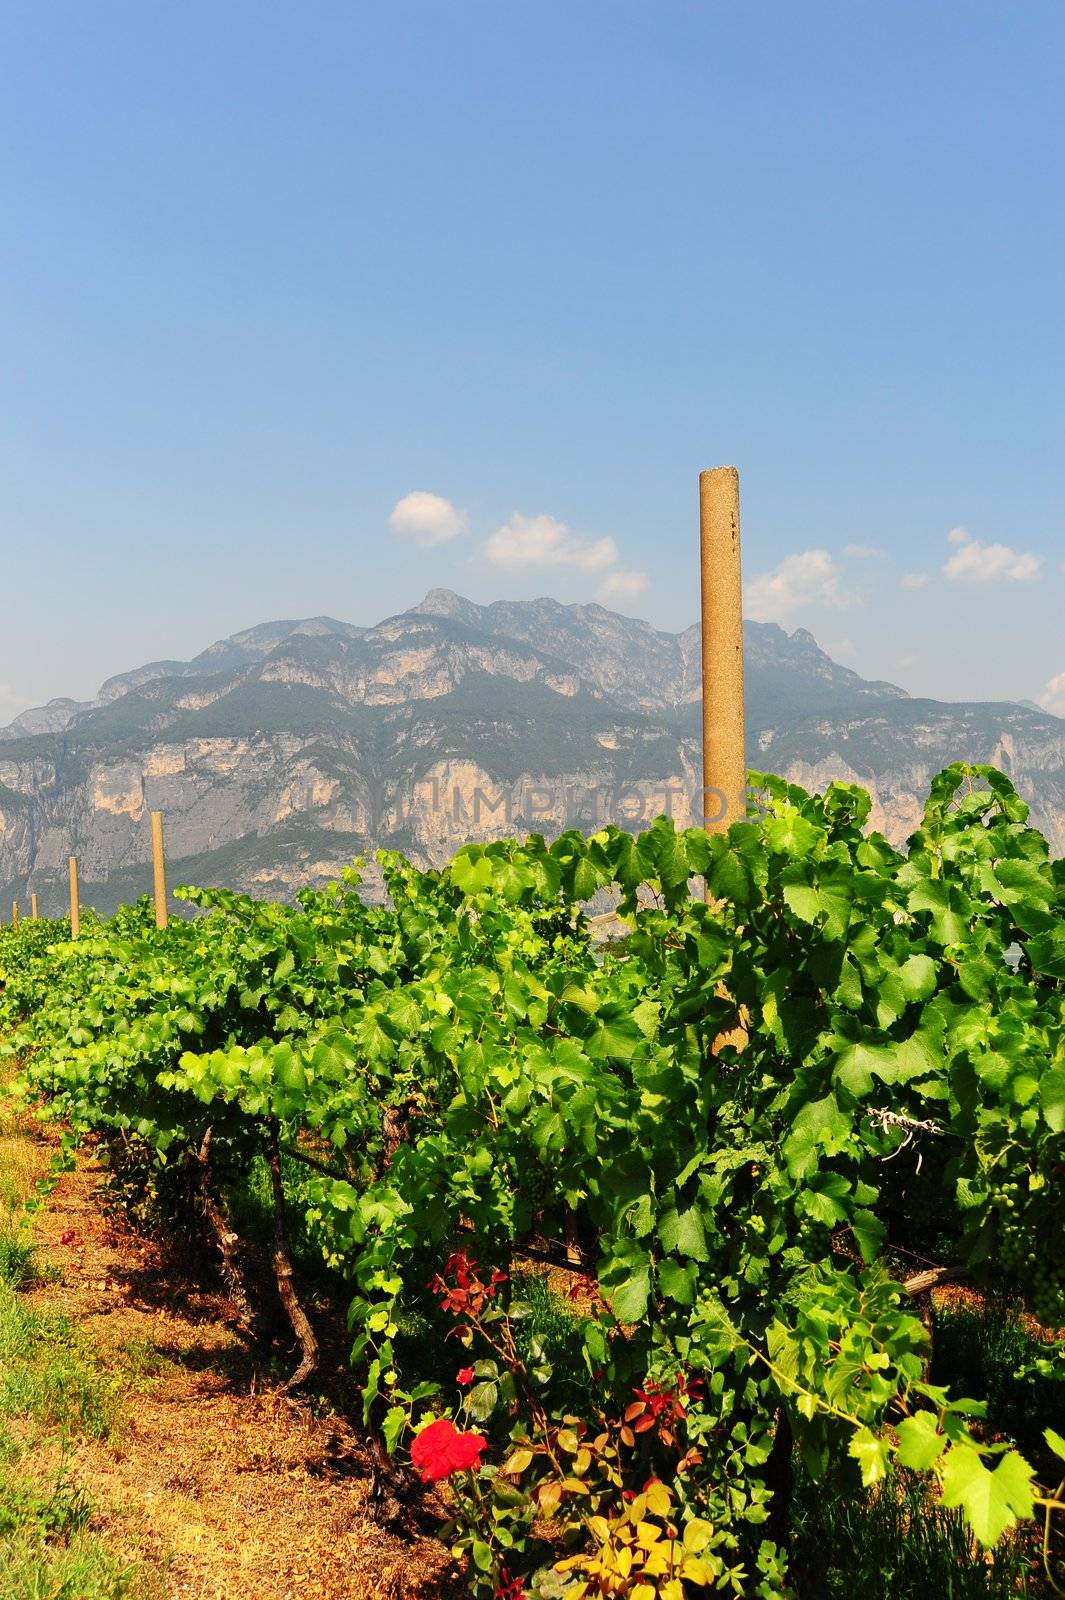 The Vineyard At the Foot Of The Italian Alps